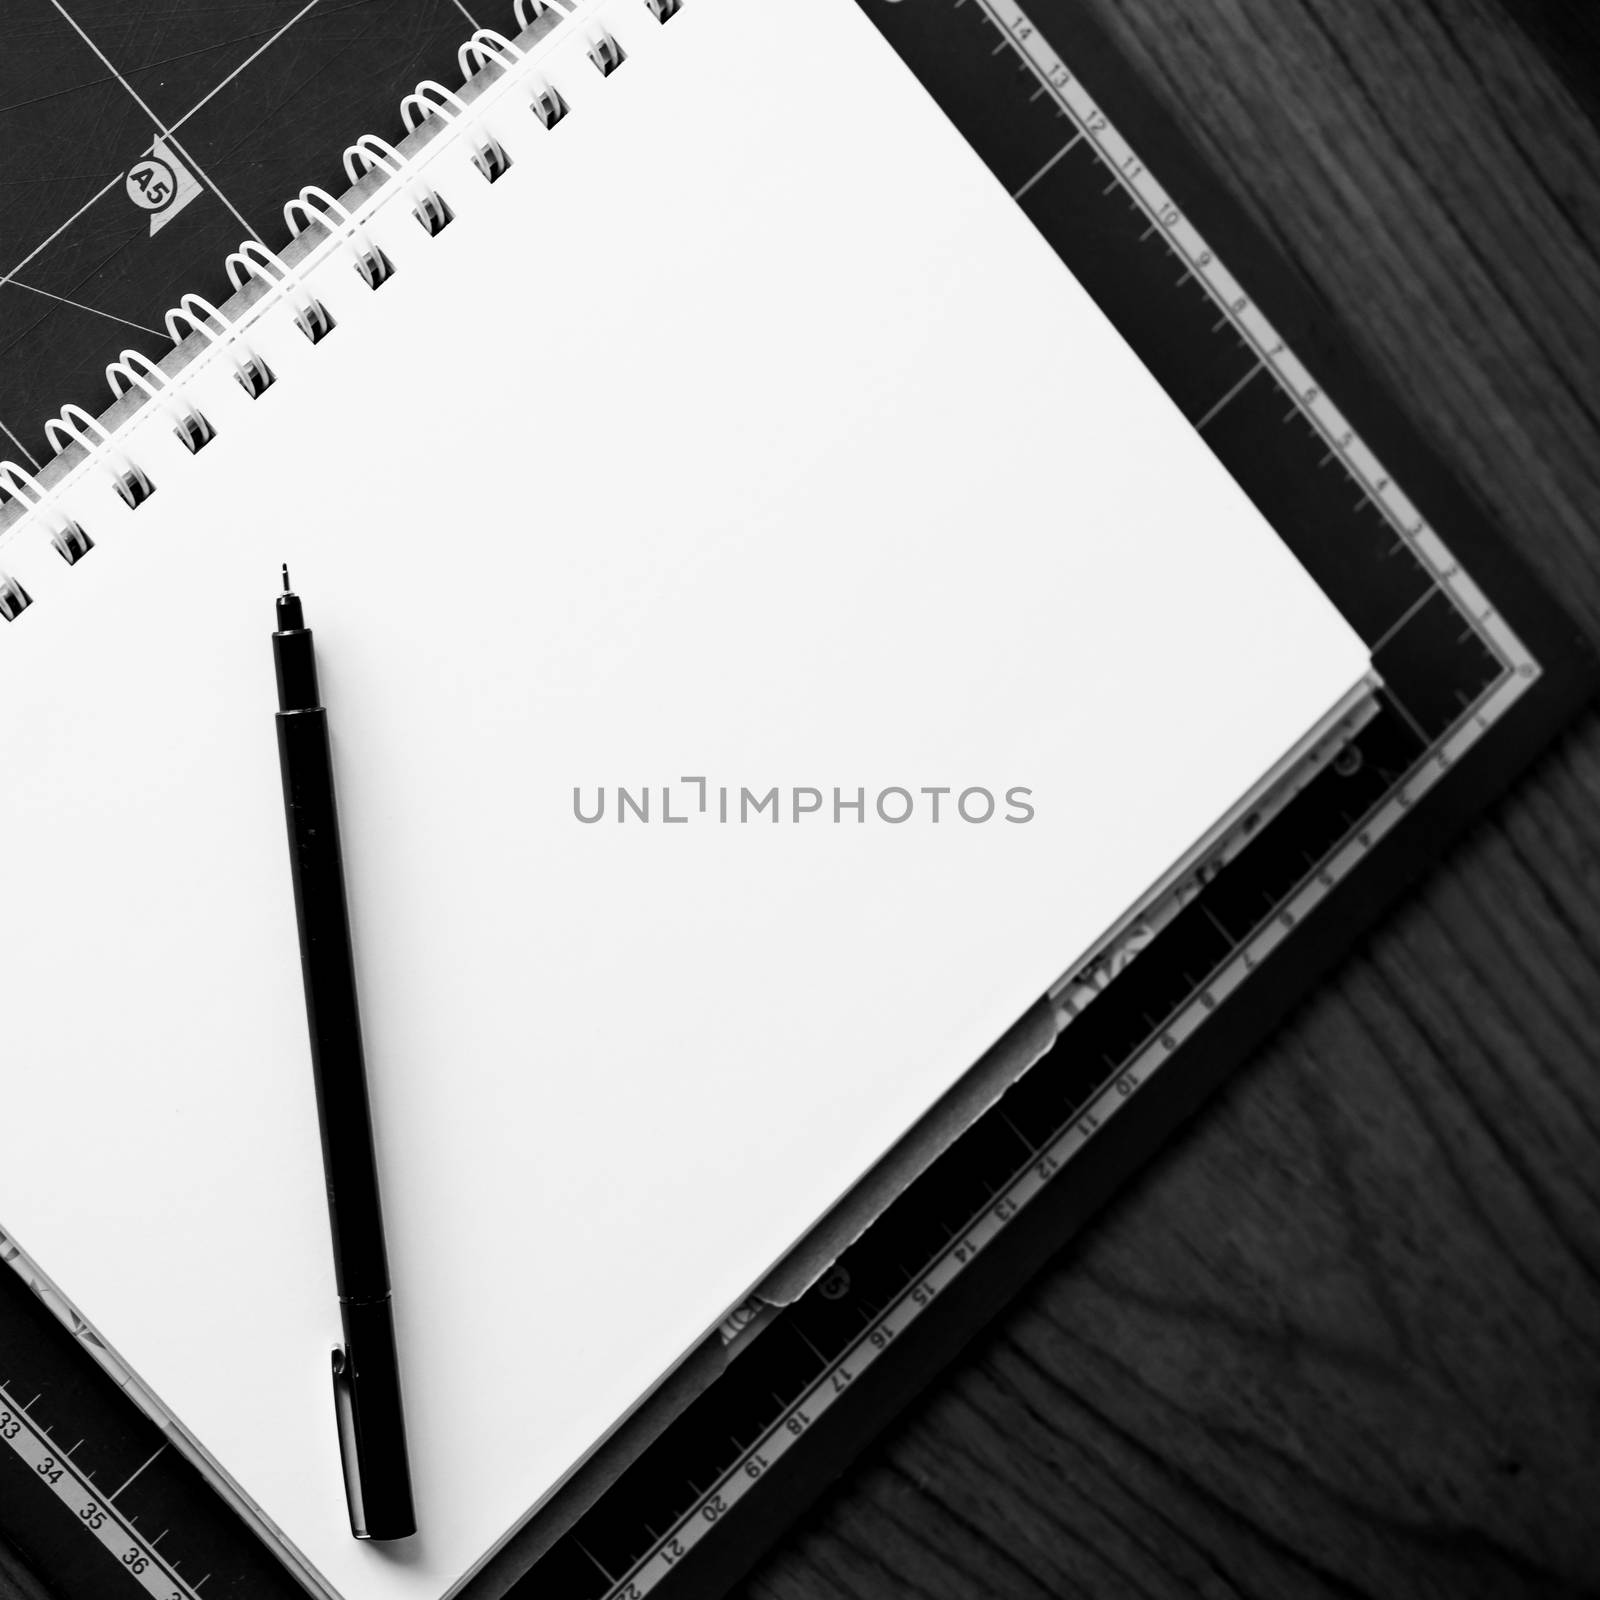 Blank notebook with pen on the table. black and white image.